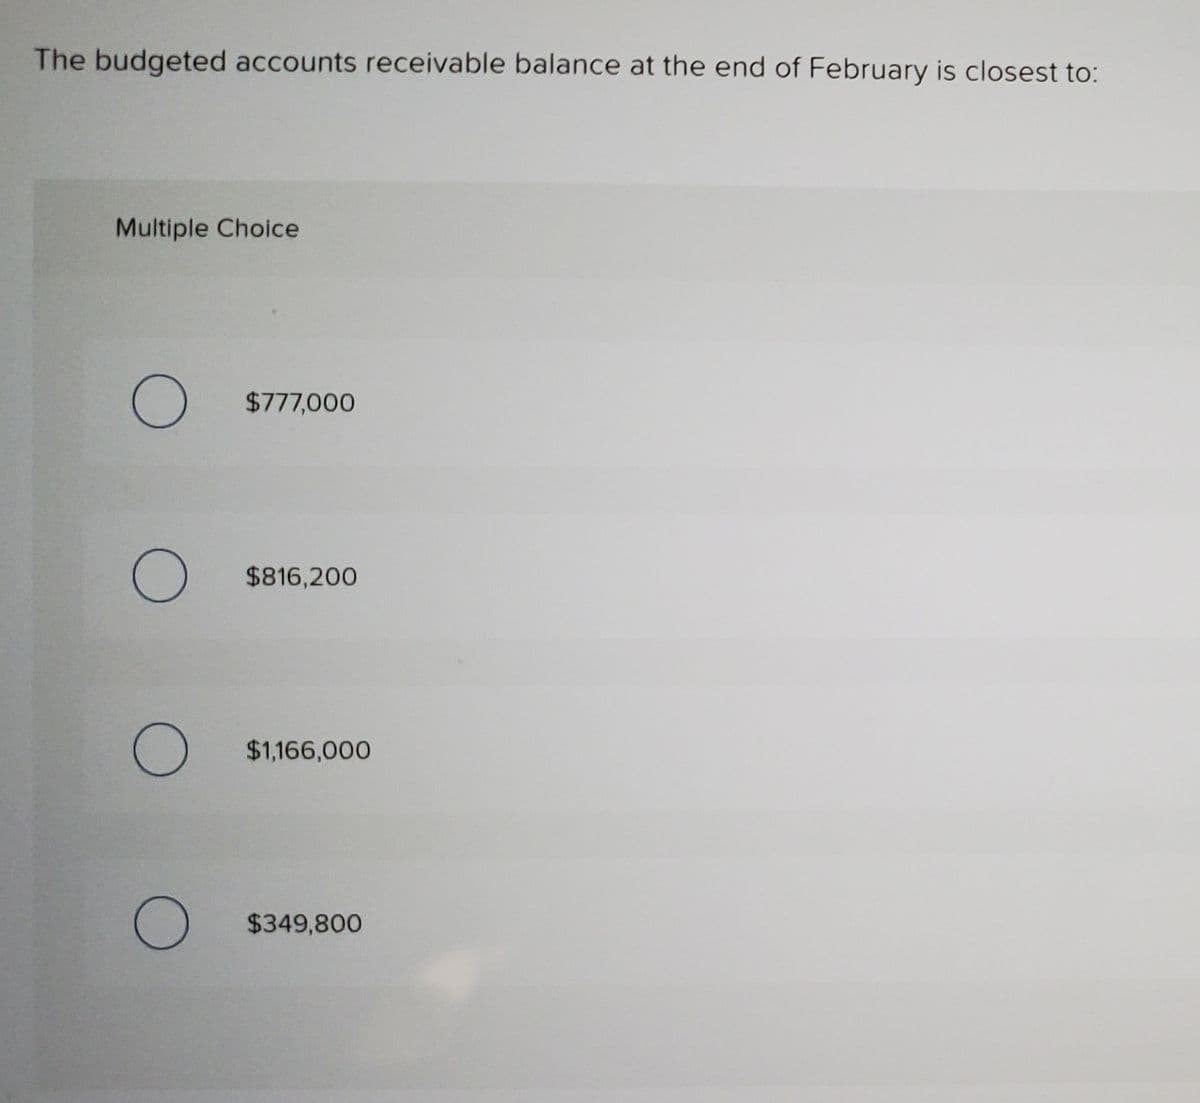 The budgeted accounts receivable balance at the end of February is closest to:
Multiple Choice
$777,000
$816,200
$1,166,000
$349,800
